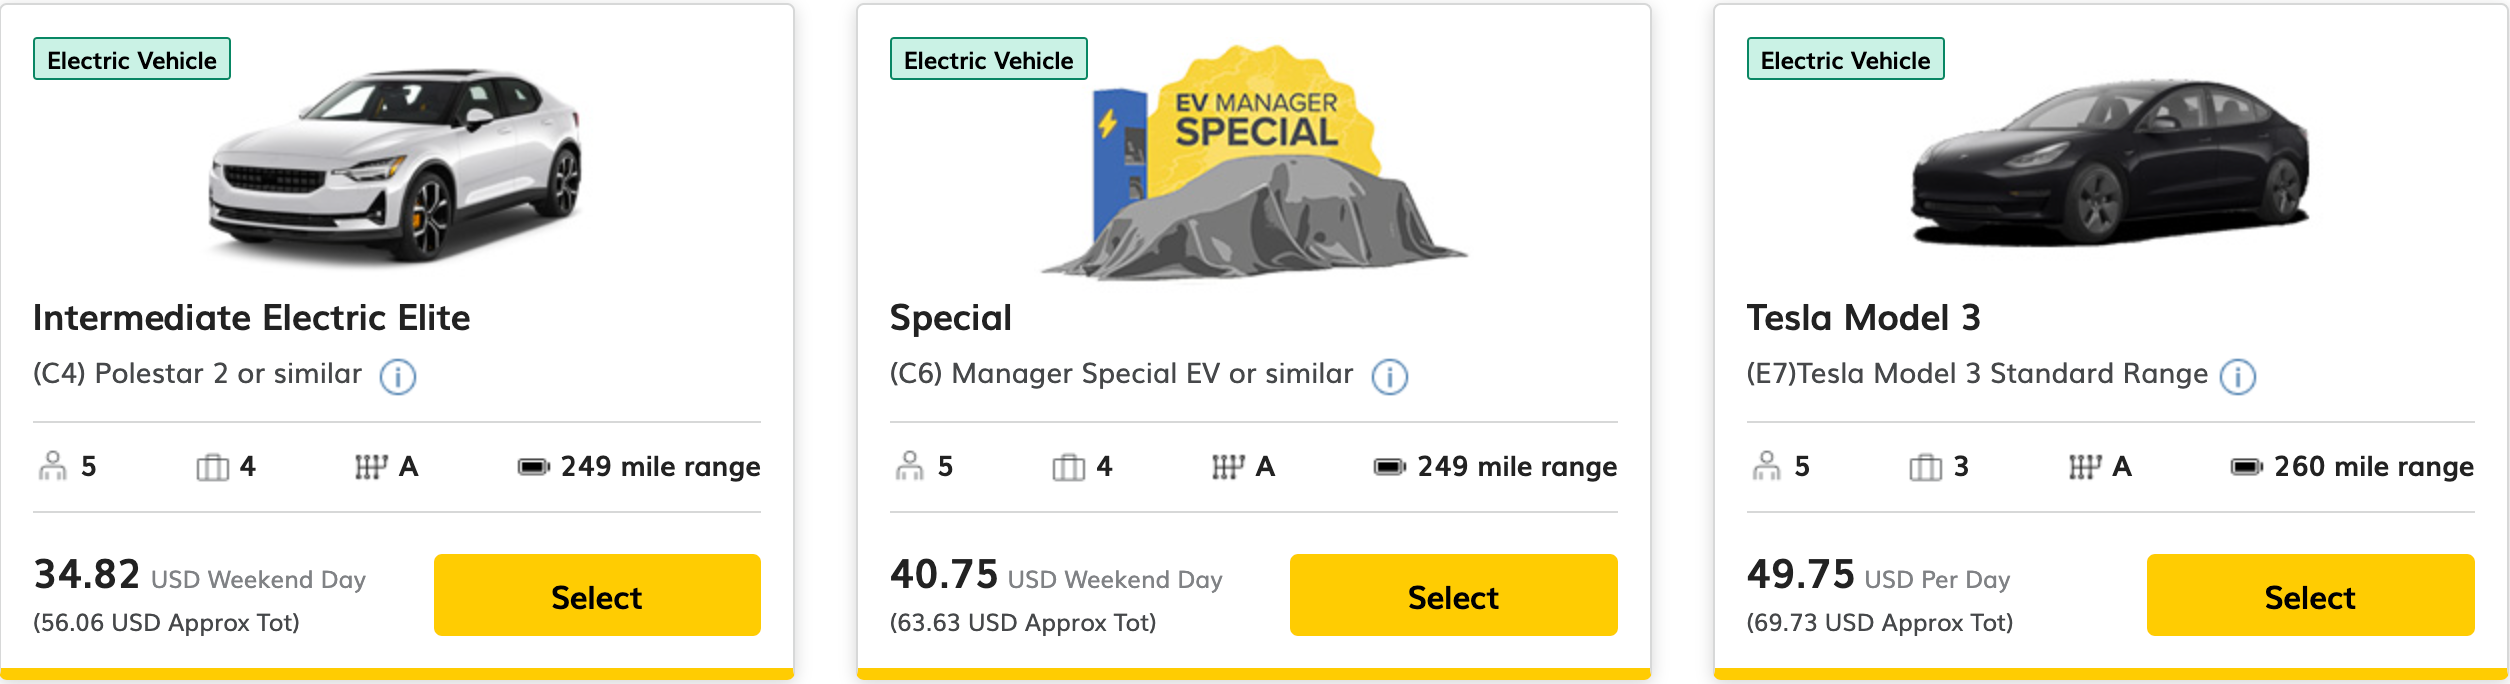 Get a free day with a Hertz electric rental with this promo code The